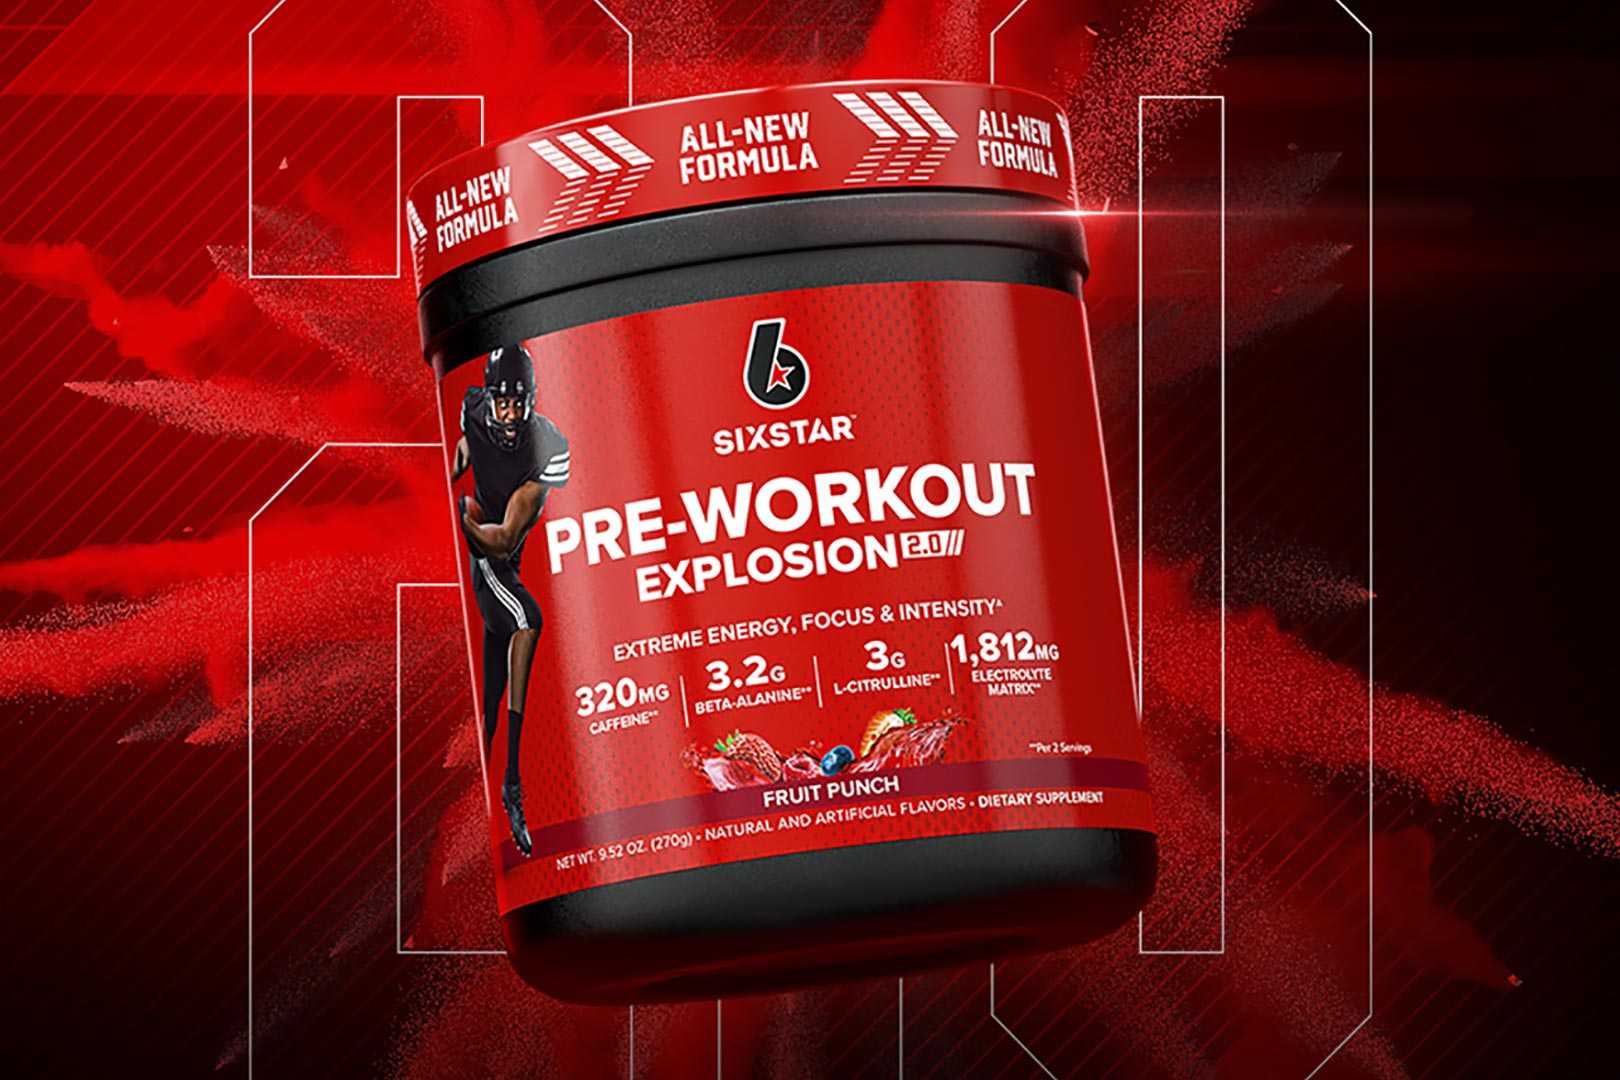 Six Star improves the taste, strength and completeness of its cost-effective pre-workout